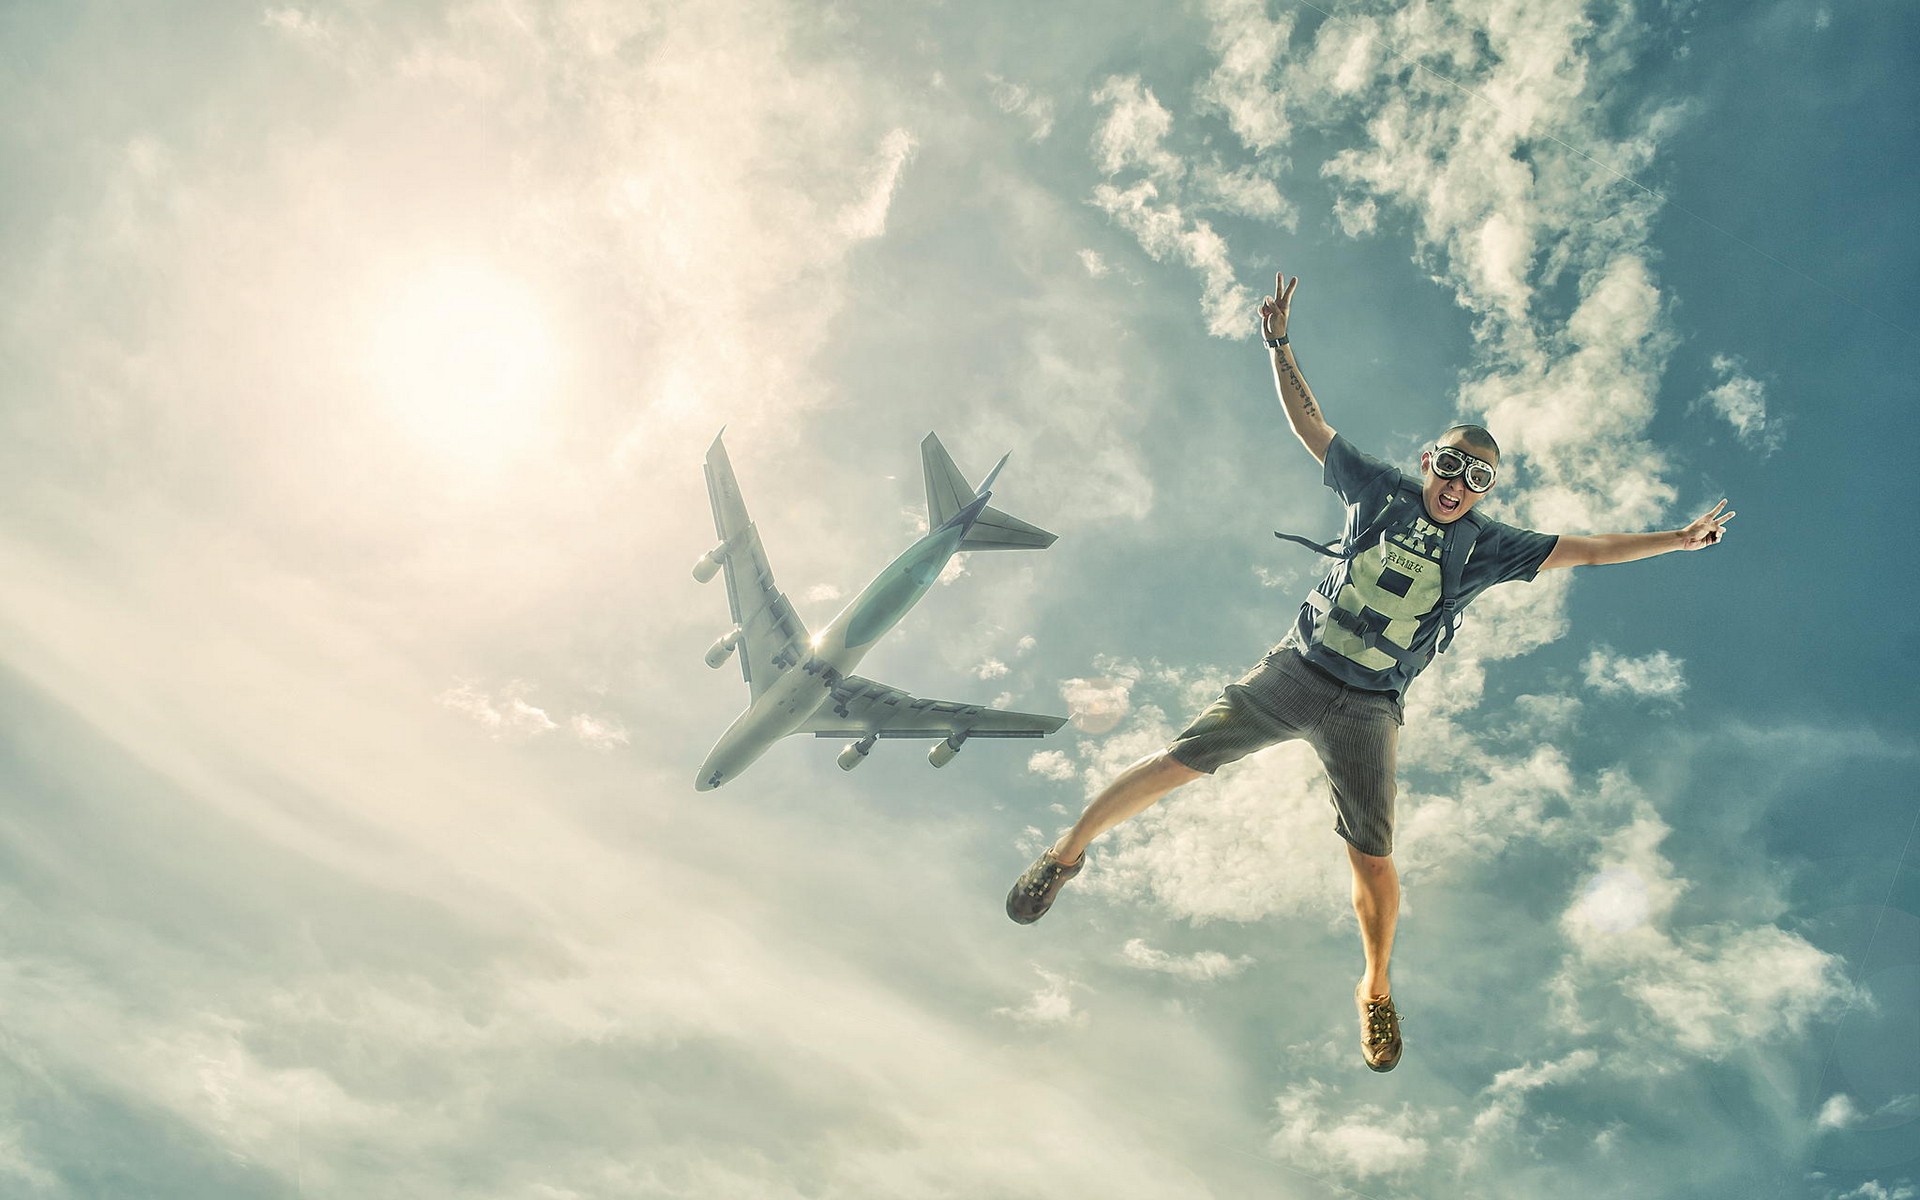 Landscape Jumping Airplane Sky Sun Clouds Skydiver Sports Aircraft Sky Men Clouds Jumping 1920x1200